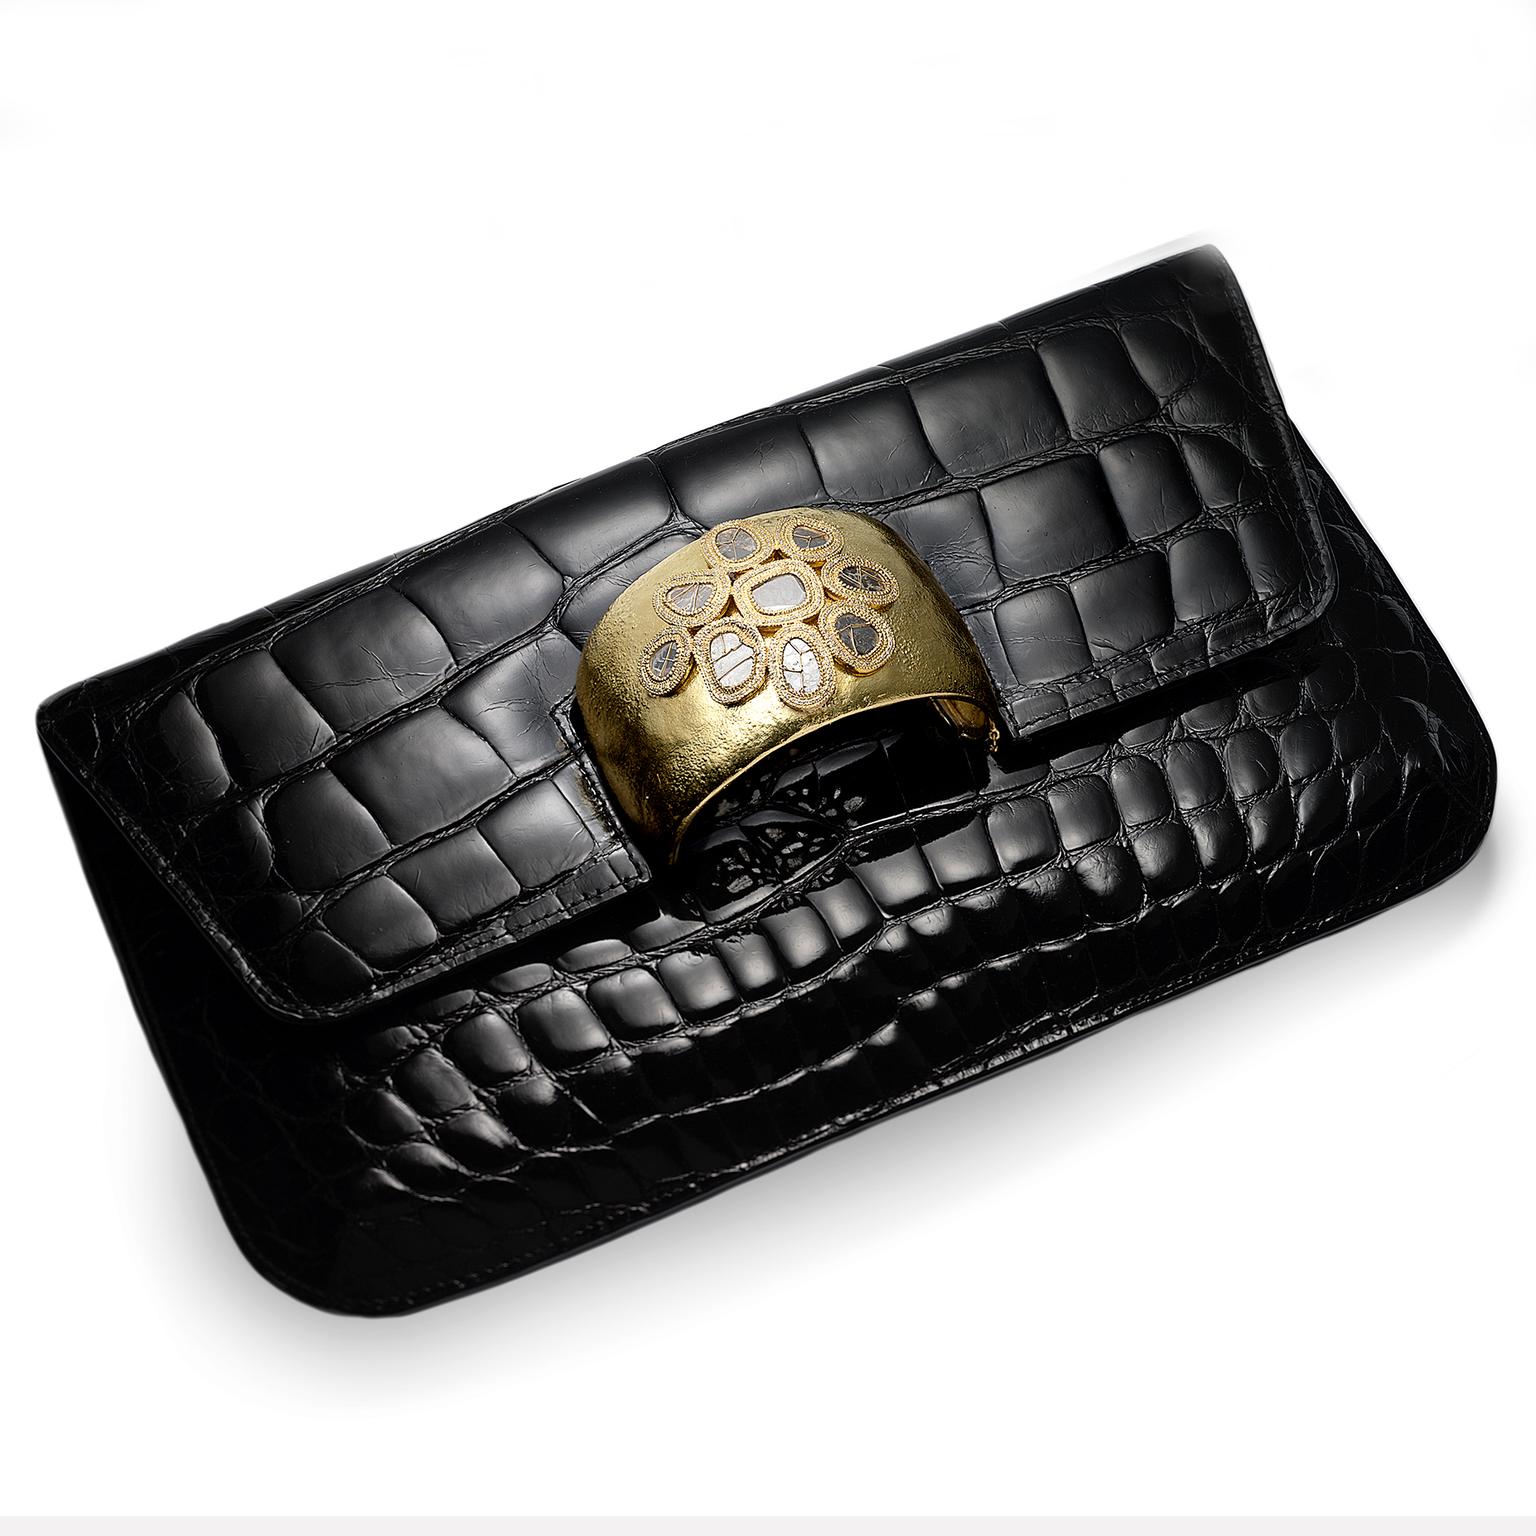 Coomi black leather bag with gold cuff